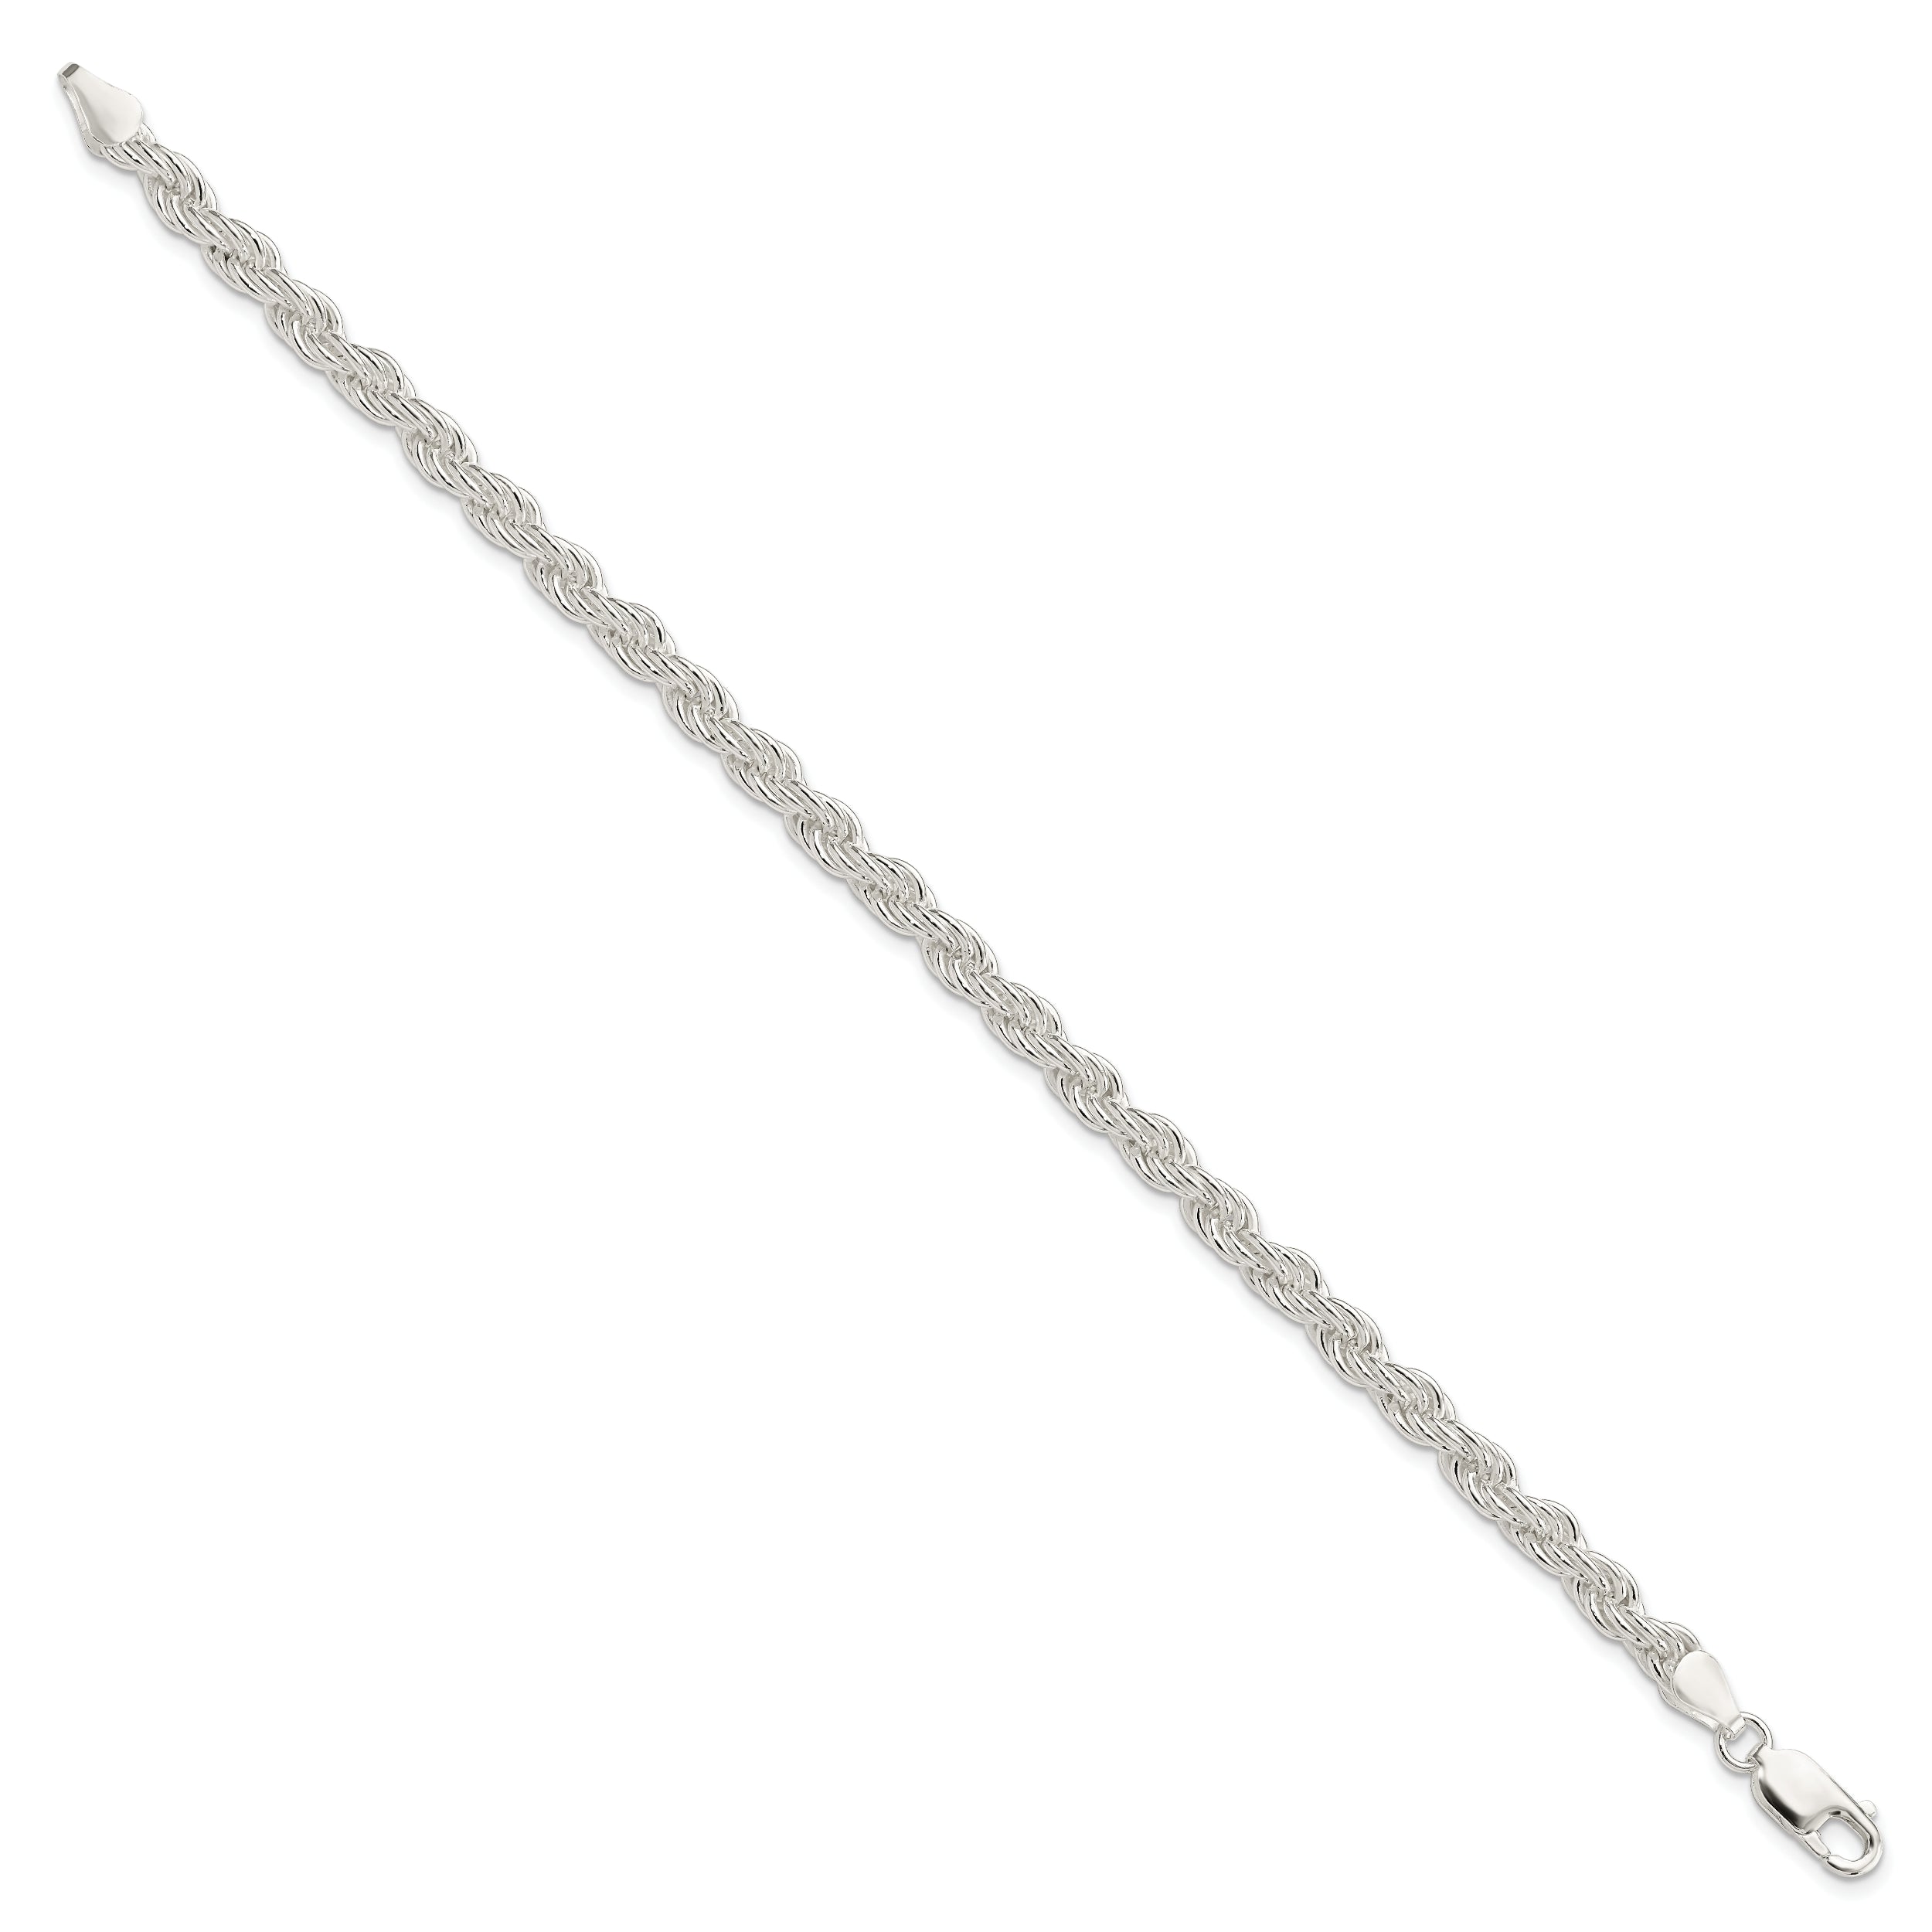 Sterling Silver 5mm Solid Rope Chain